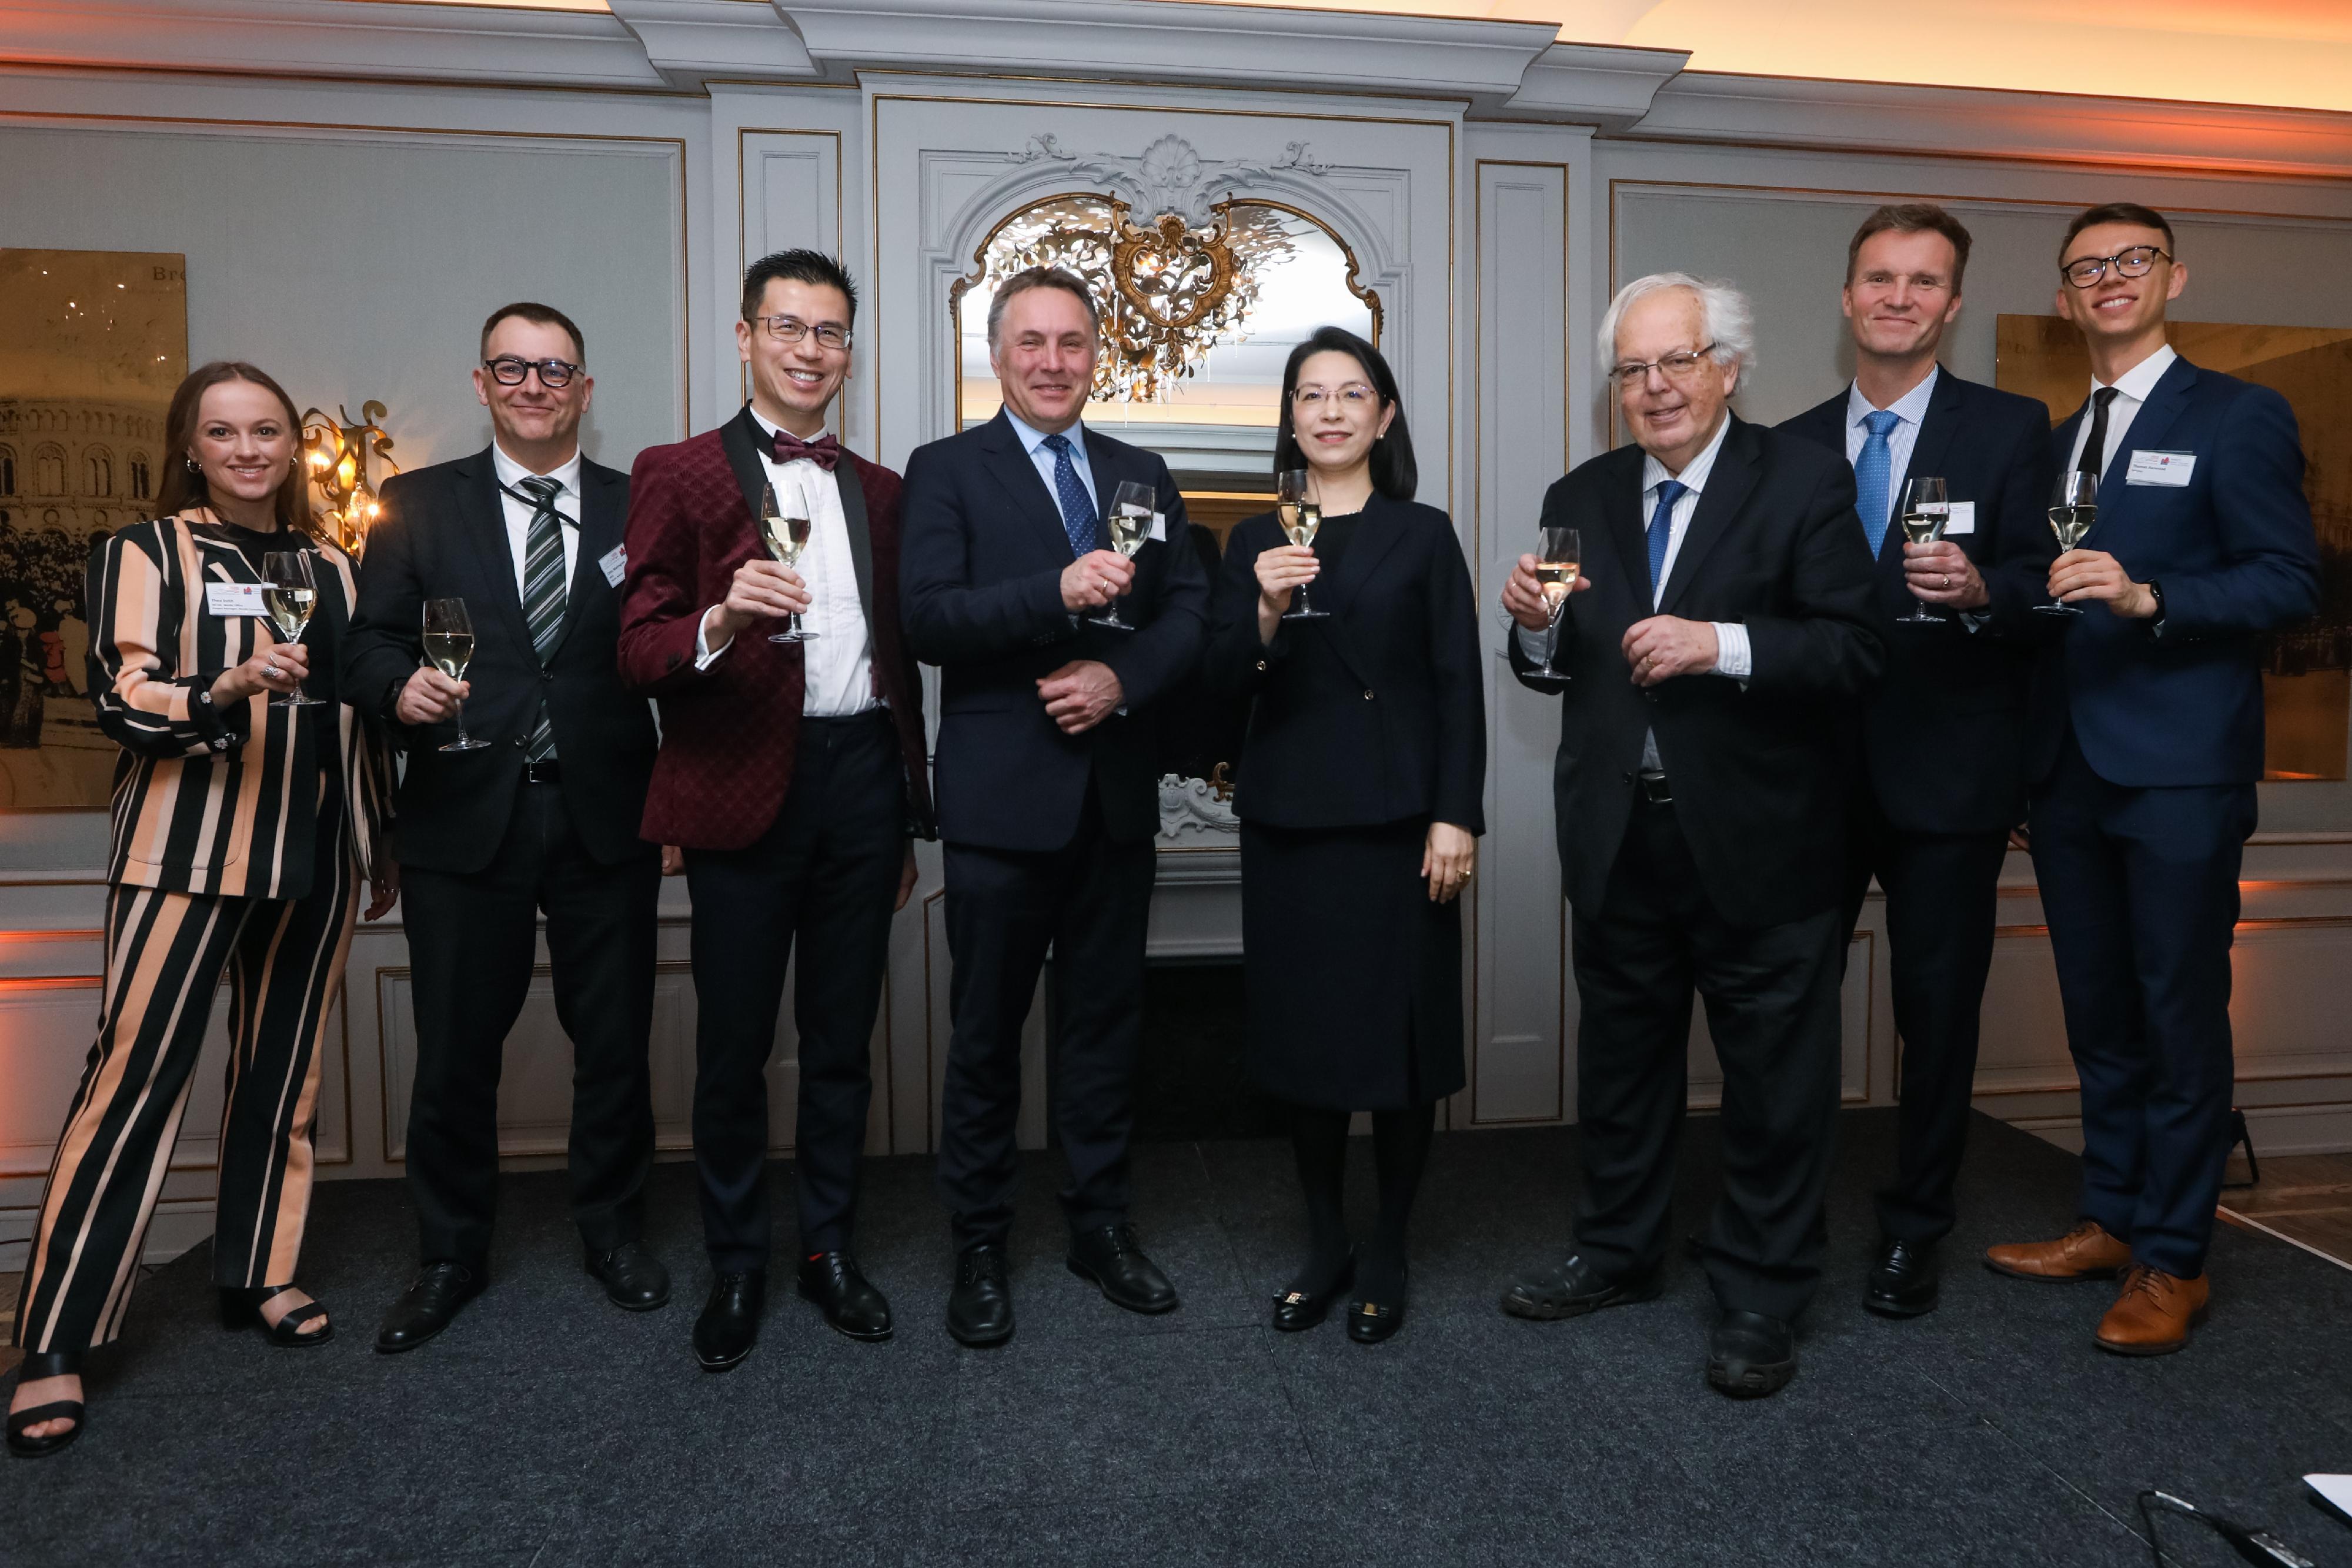 The Hong Kong Economic and Trade Office, London (London ETO) and the Norway-Hong Kong Chamber of Commerce cohosted a Year of the Dragon reception in Oslo, Norway, on February 27 (Oslo time). Photo shows (from left) the Senior Project Manager, Nordics of the Hong Kong Trade Development Council (London Office), Ms Thea Svith; the Senior Adviser of the Ministry of Foreign Affairs in Norway, Mr Otto Malmgren; the Director-General of the London ETO, Mr Gilford Law; the State Secretary of the Ministry of Trade, Industry and Fisheries in Norway, Mr Tore O Sandvik; the Ambassador Extraordinary and Plenipotentiary and Head of Mission of the People's Republic of China to the Kingdom of Norway, Ms Hou Yue; the President of the Norway-Hong Kong Chamber of Commerce, Mr Rolf Willy Hansen; the Regional Director Asia and Middle East of Innovation Norway, Mr Ole Henaes and the Sales Executive of Emirates, Mr Thomas Aannestad toasting at the reception.